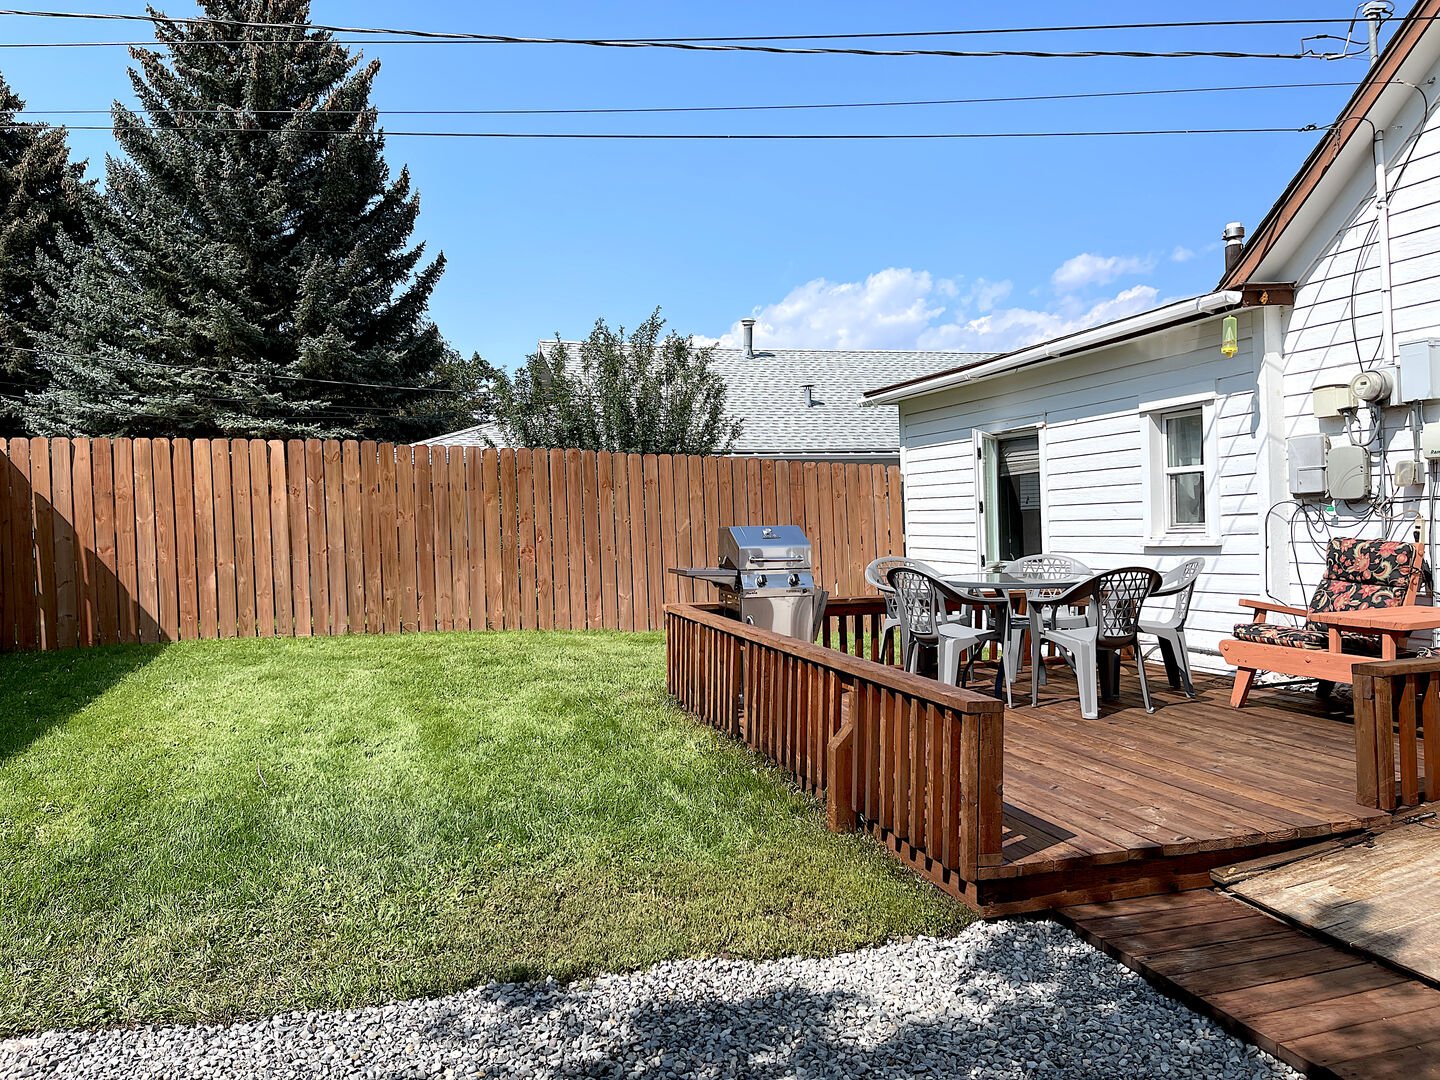 Deck and Yard for outdoor enjoyment!